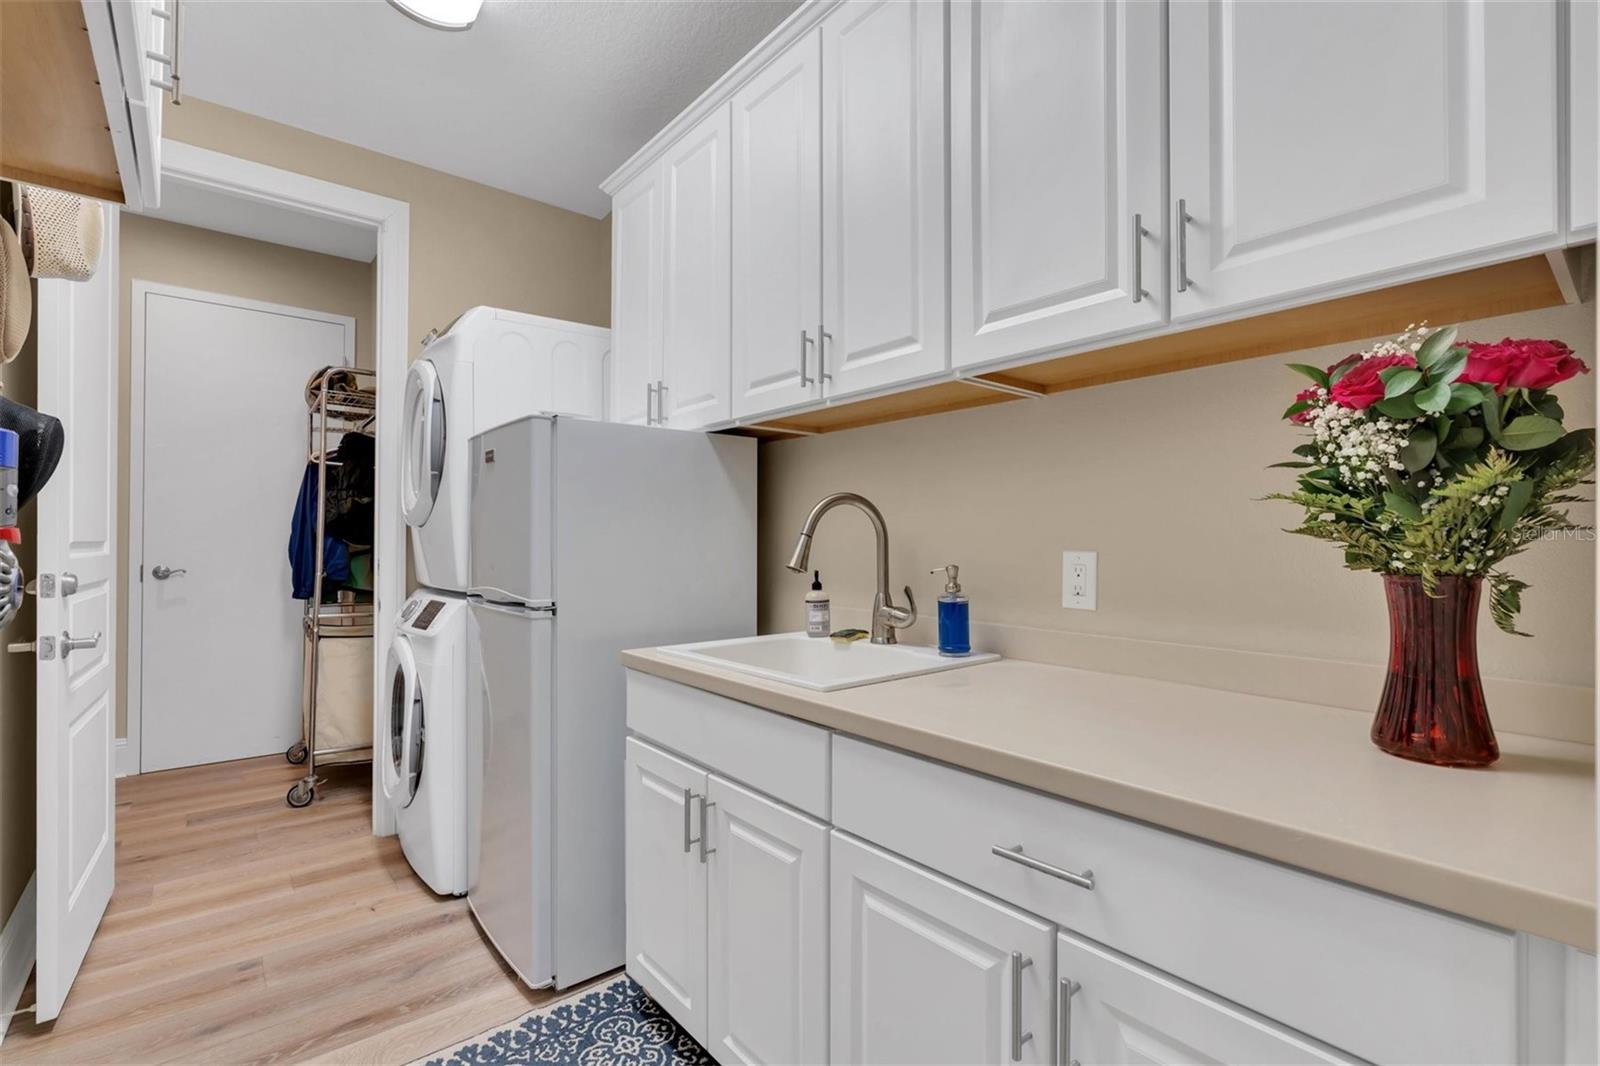 Laundry room with additional storage